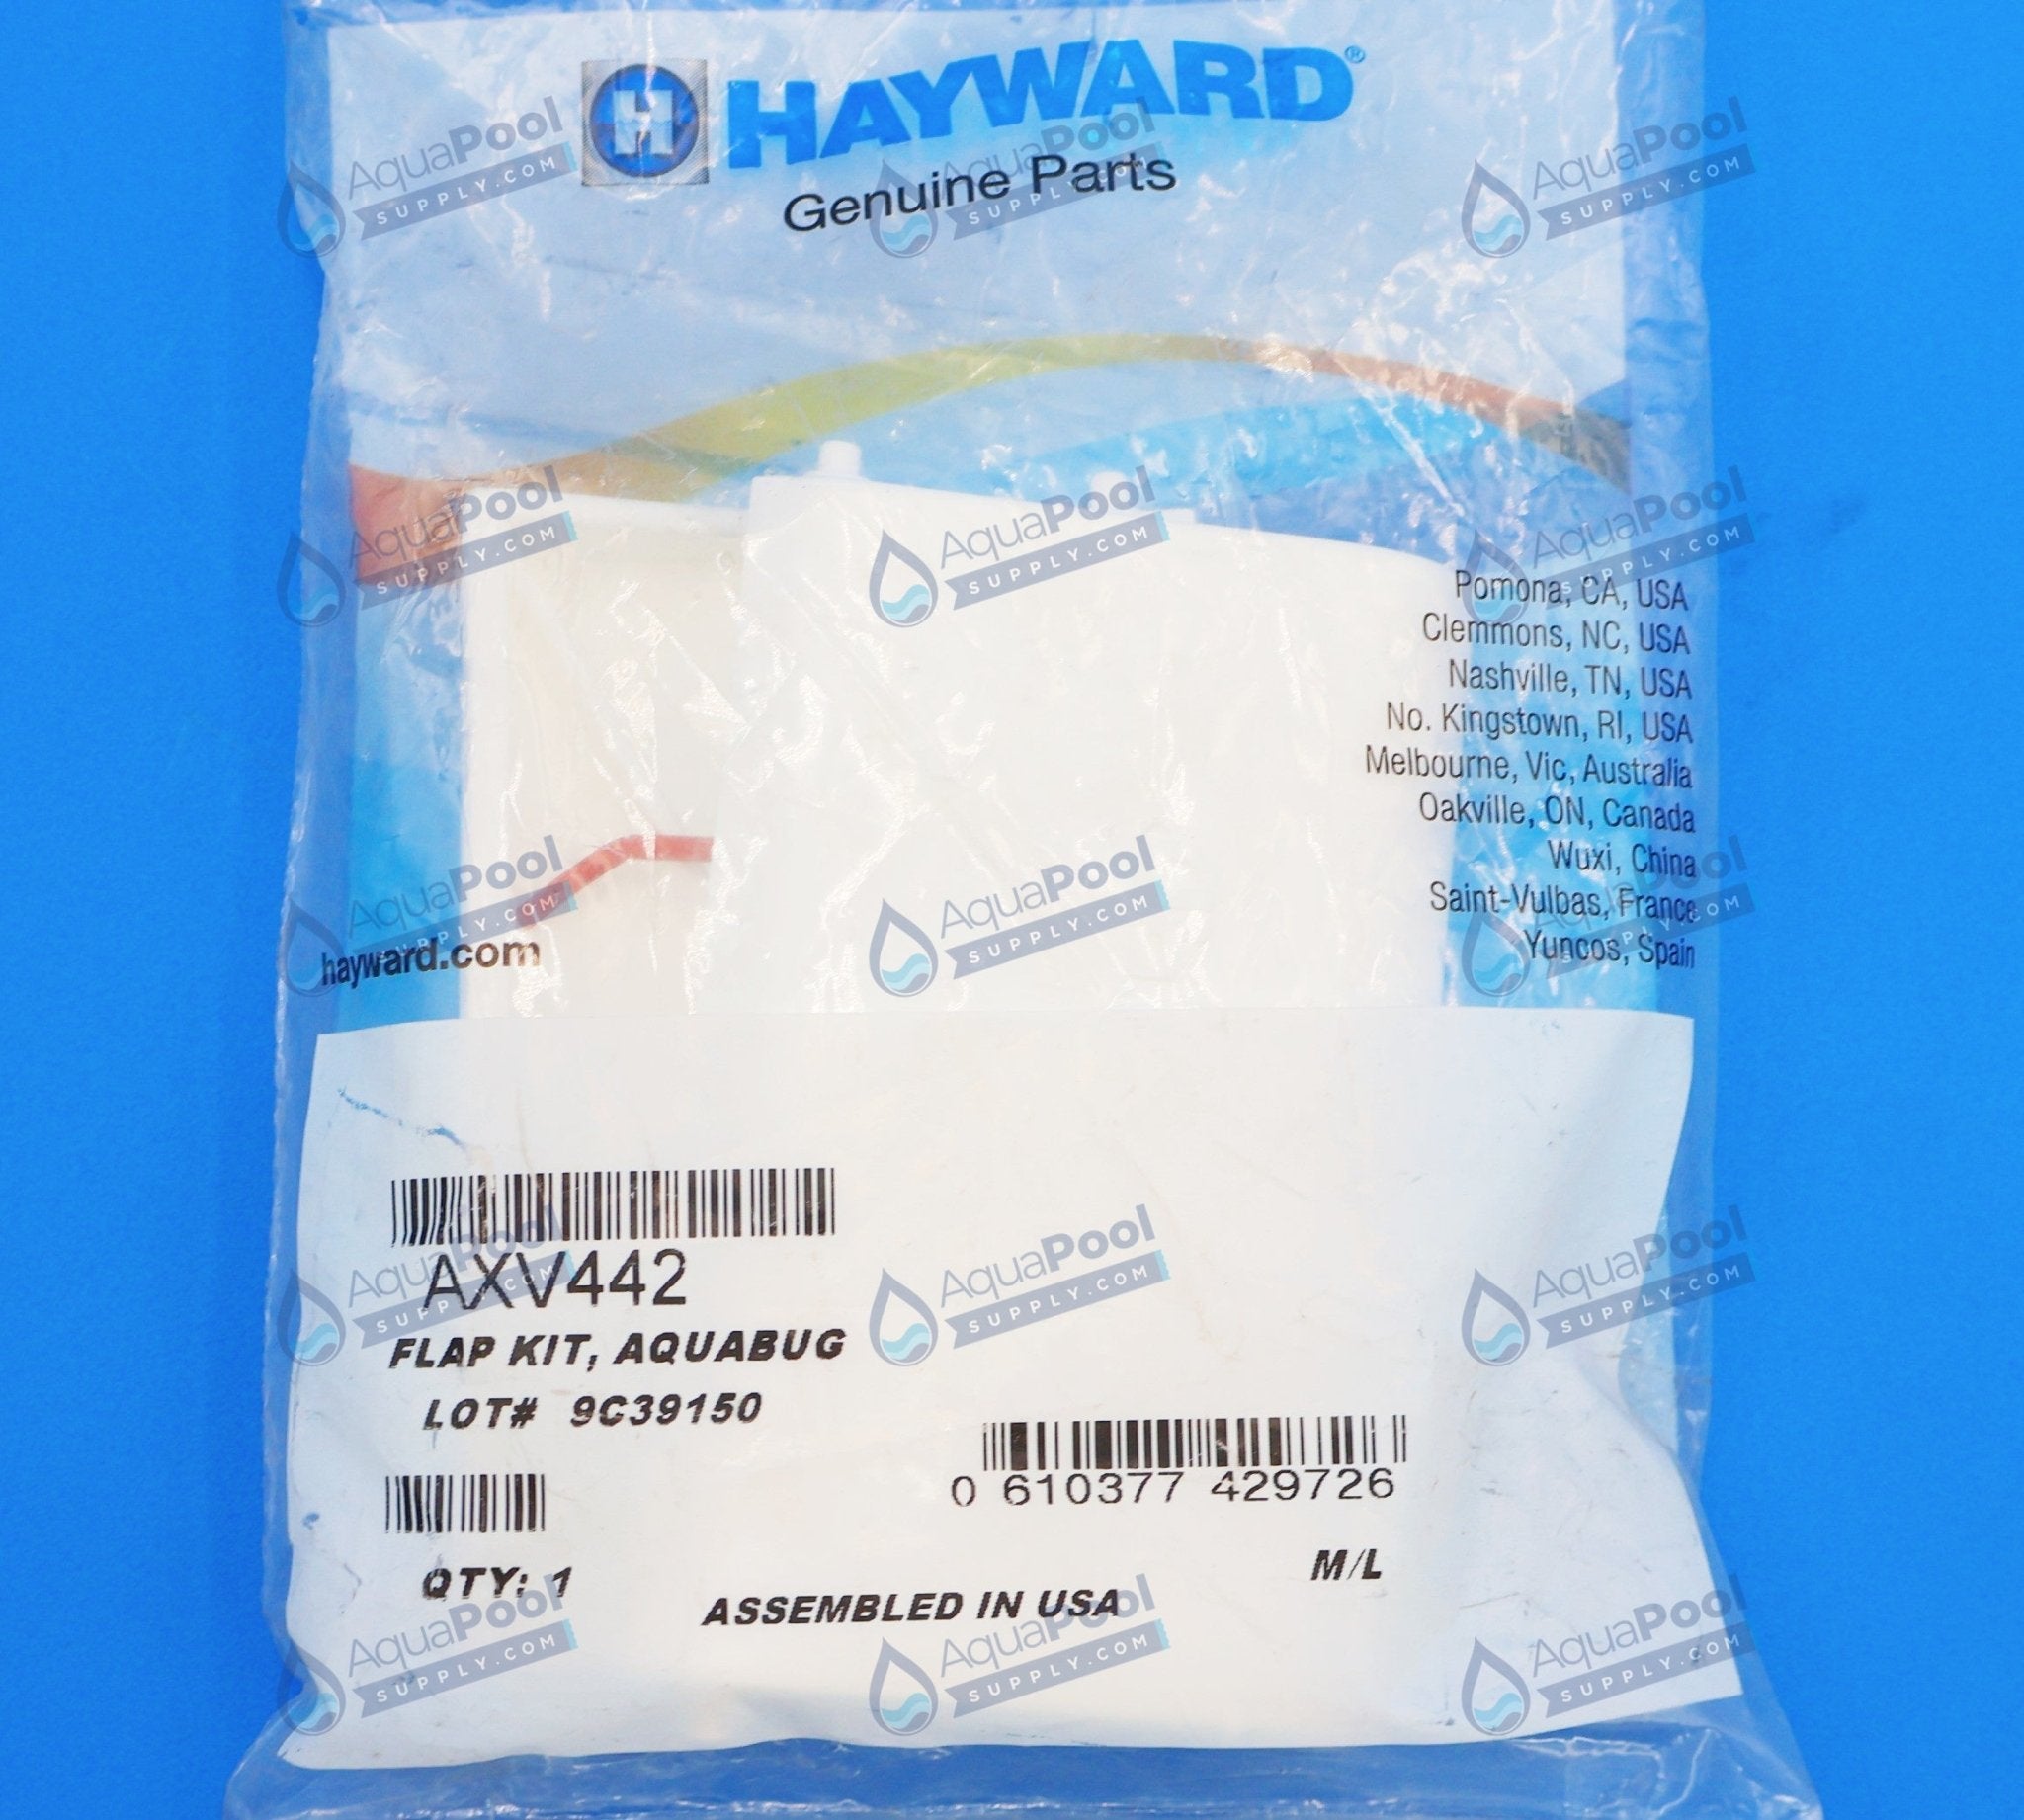 Hayward White Flap Kit for AquaBug, Penguin, Wanda the Whale, Diver Dave - Includes 2 Flaps (Front & Rear) AXV442 - img-5